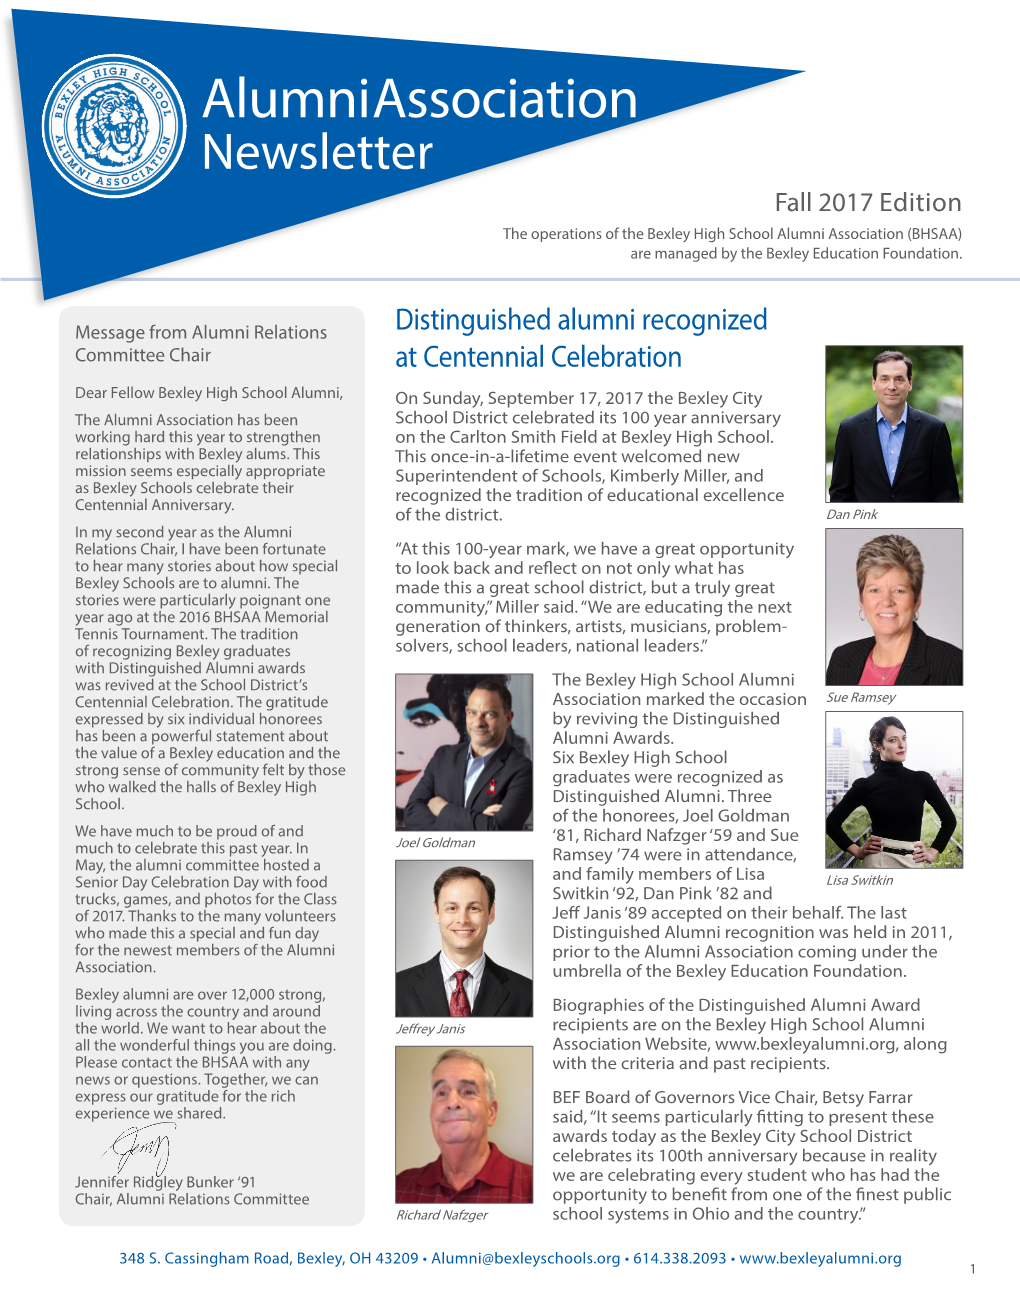 Fall 2017 Edition the Operations of the Bexley High School Alumni Association (BHSAA) Are Managed by the Bexley Education Foundation